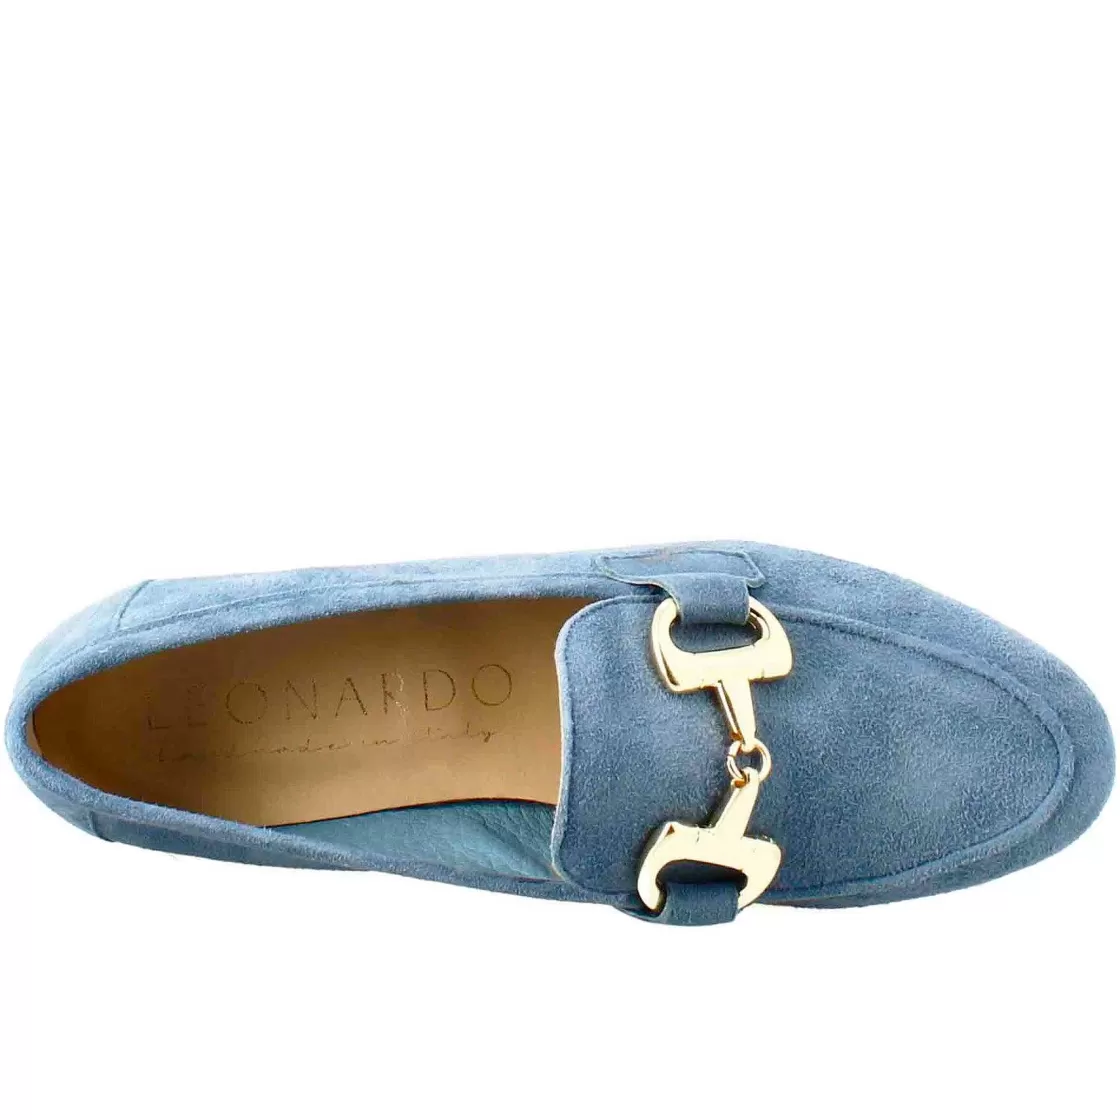 Leonardo Women'S Moccasin In Light Blue Suede With Gold Buckle Outlet